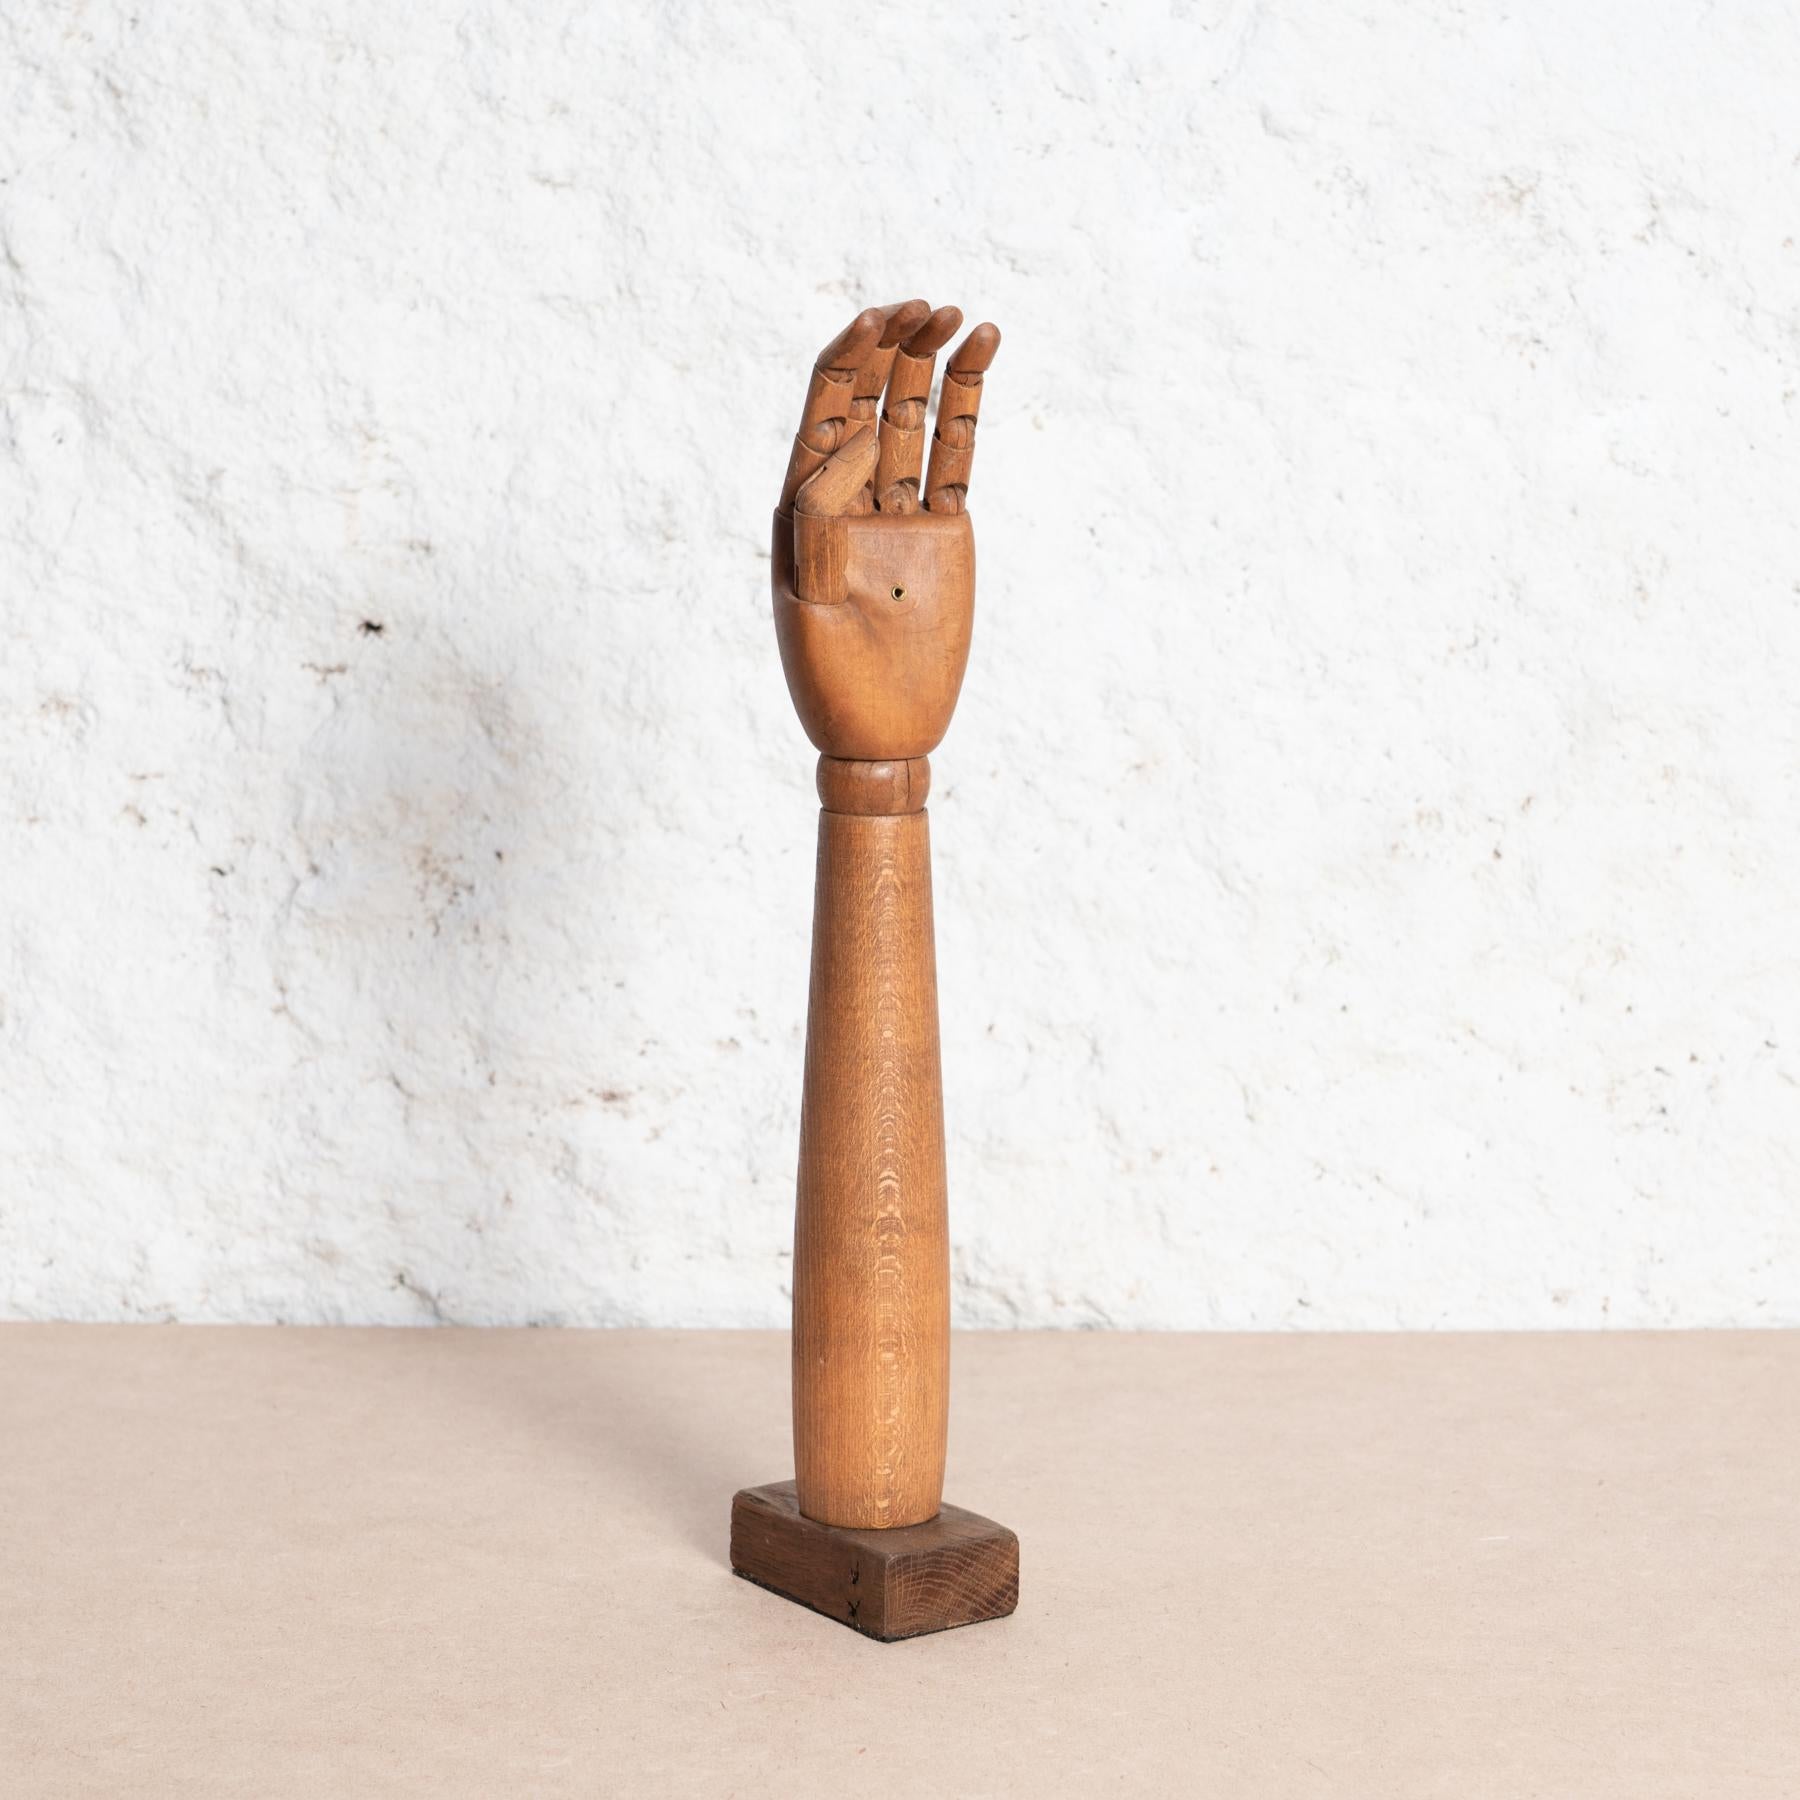 Wooden articulated arm mannequin.

Manufactured by unknown designer in Spain.

Circa 1960.

In original condition, with minor wear consistent with age and use, preserving a beautiful patina.